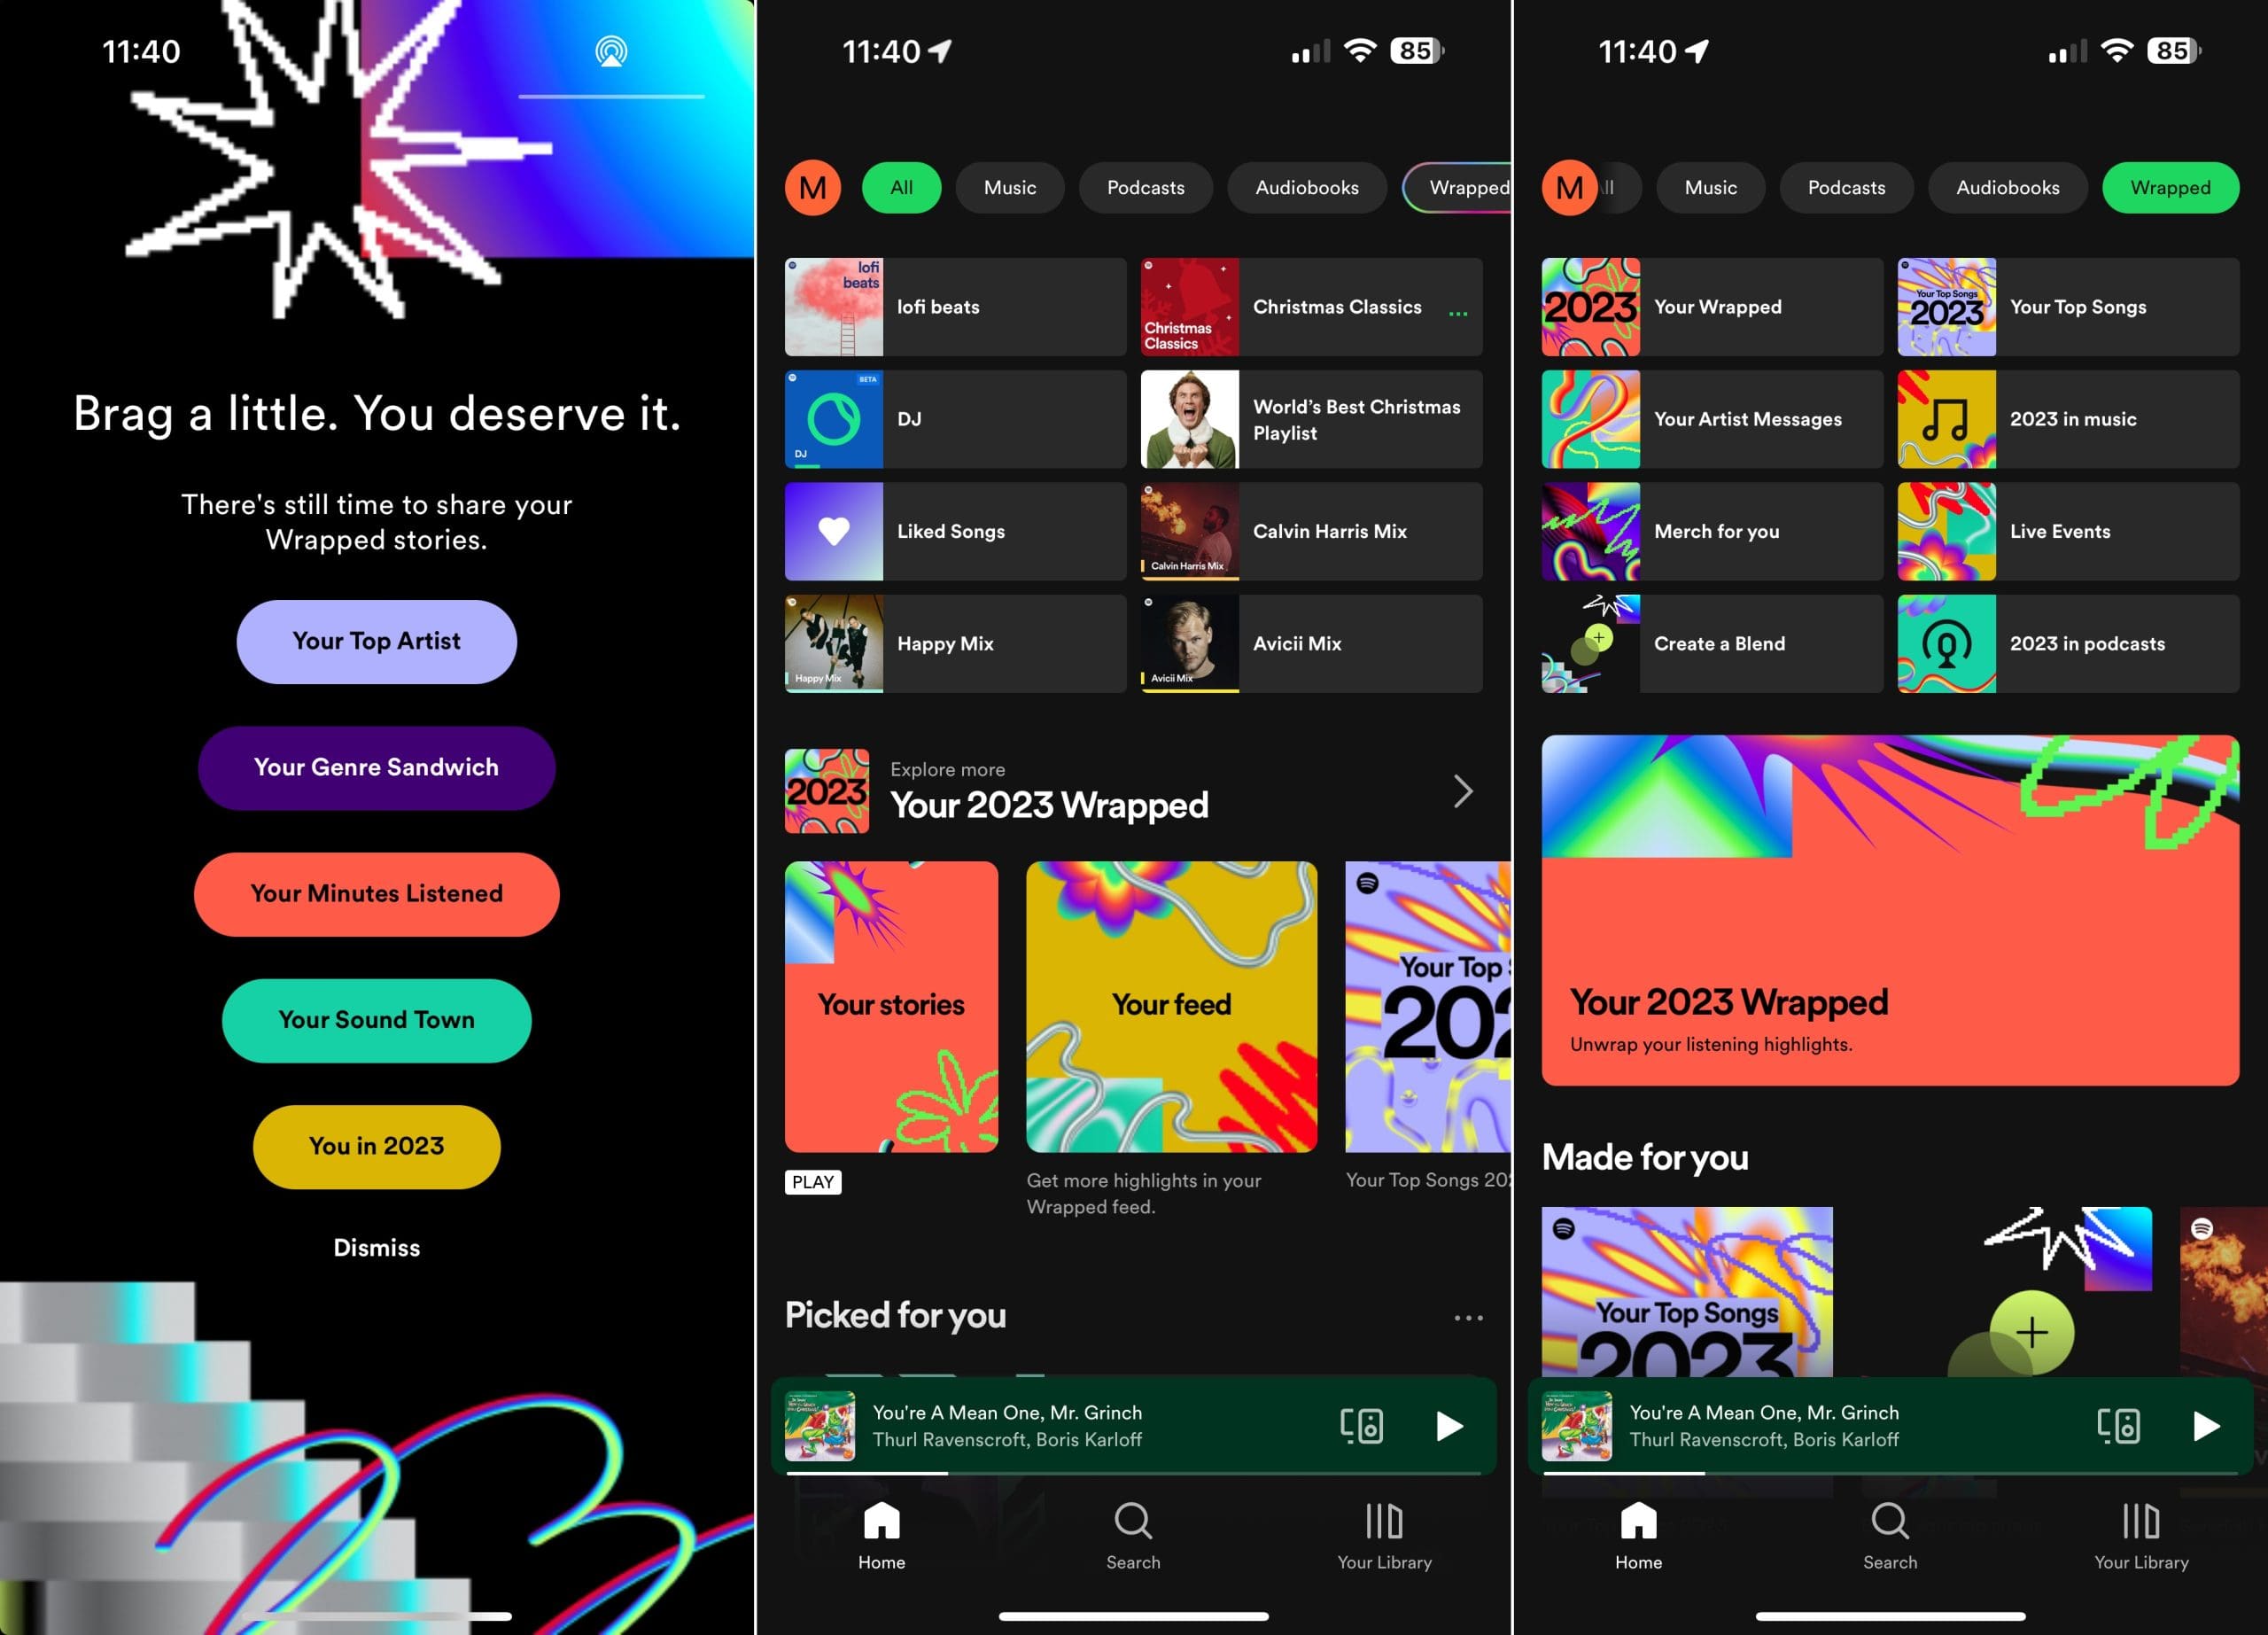 How to find Spotify Wrapped 2023 on iPhone